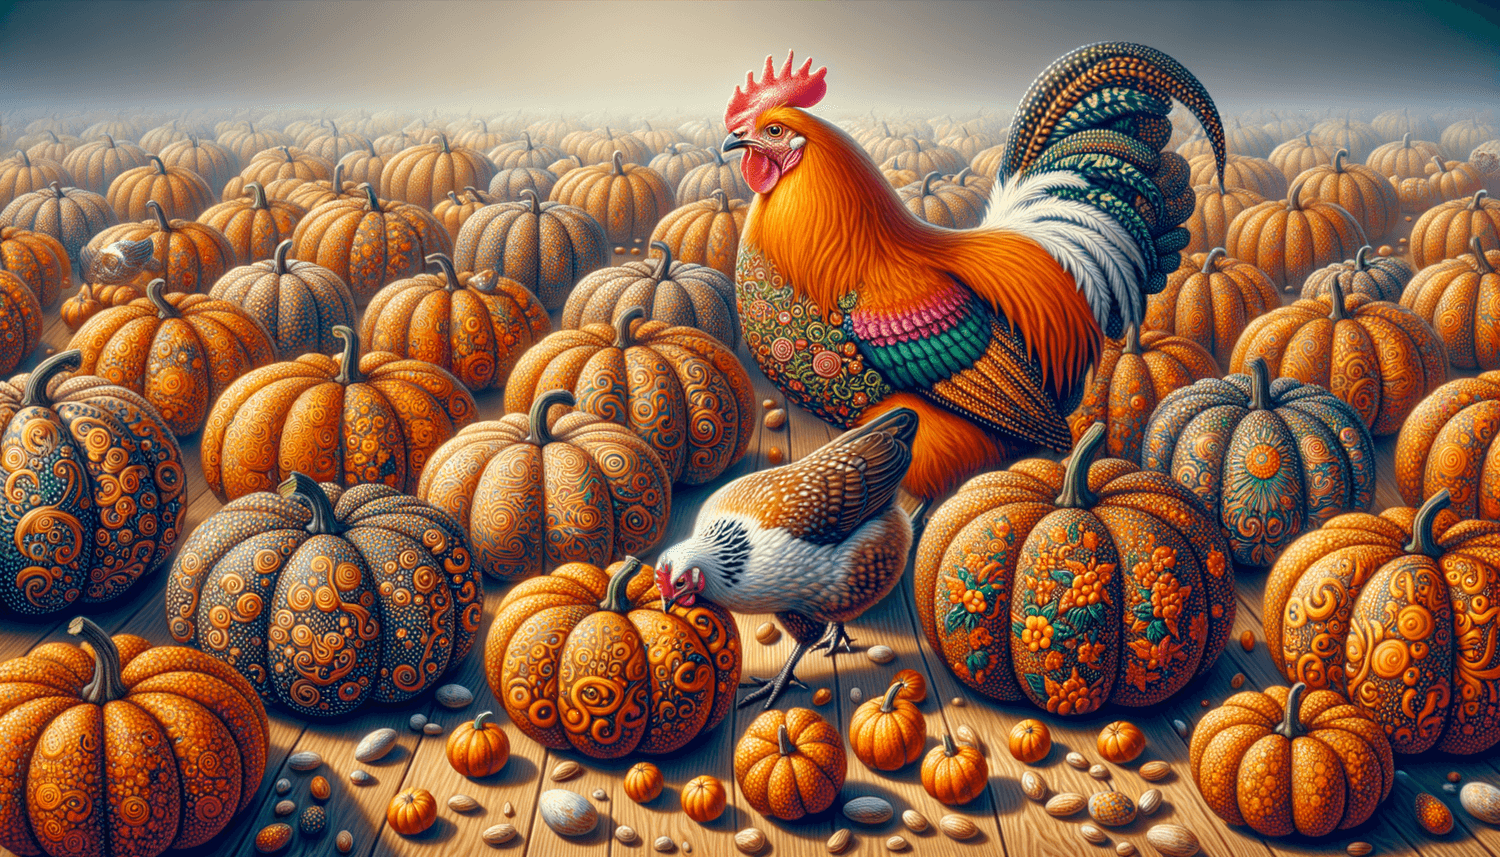 Can Chickens Eat Painted Pumpkins?